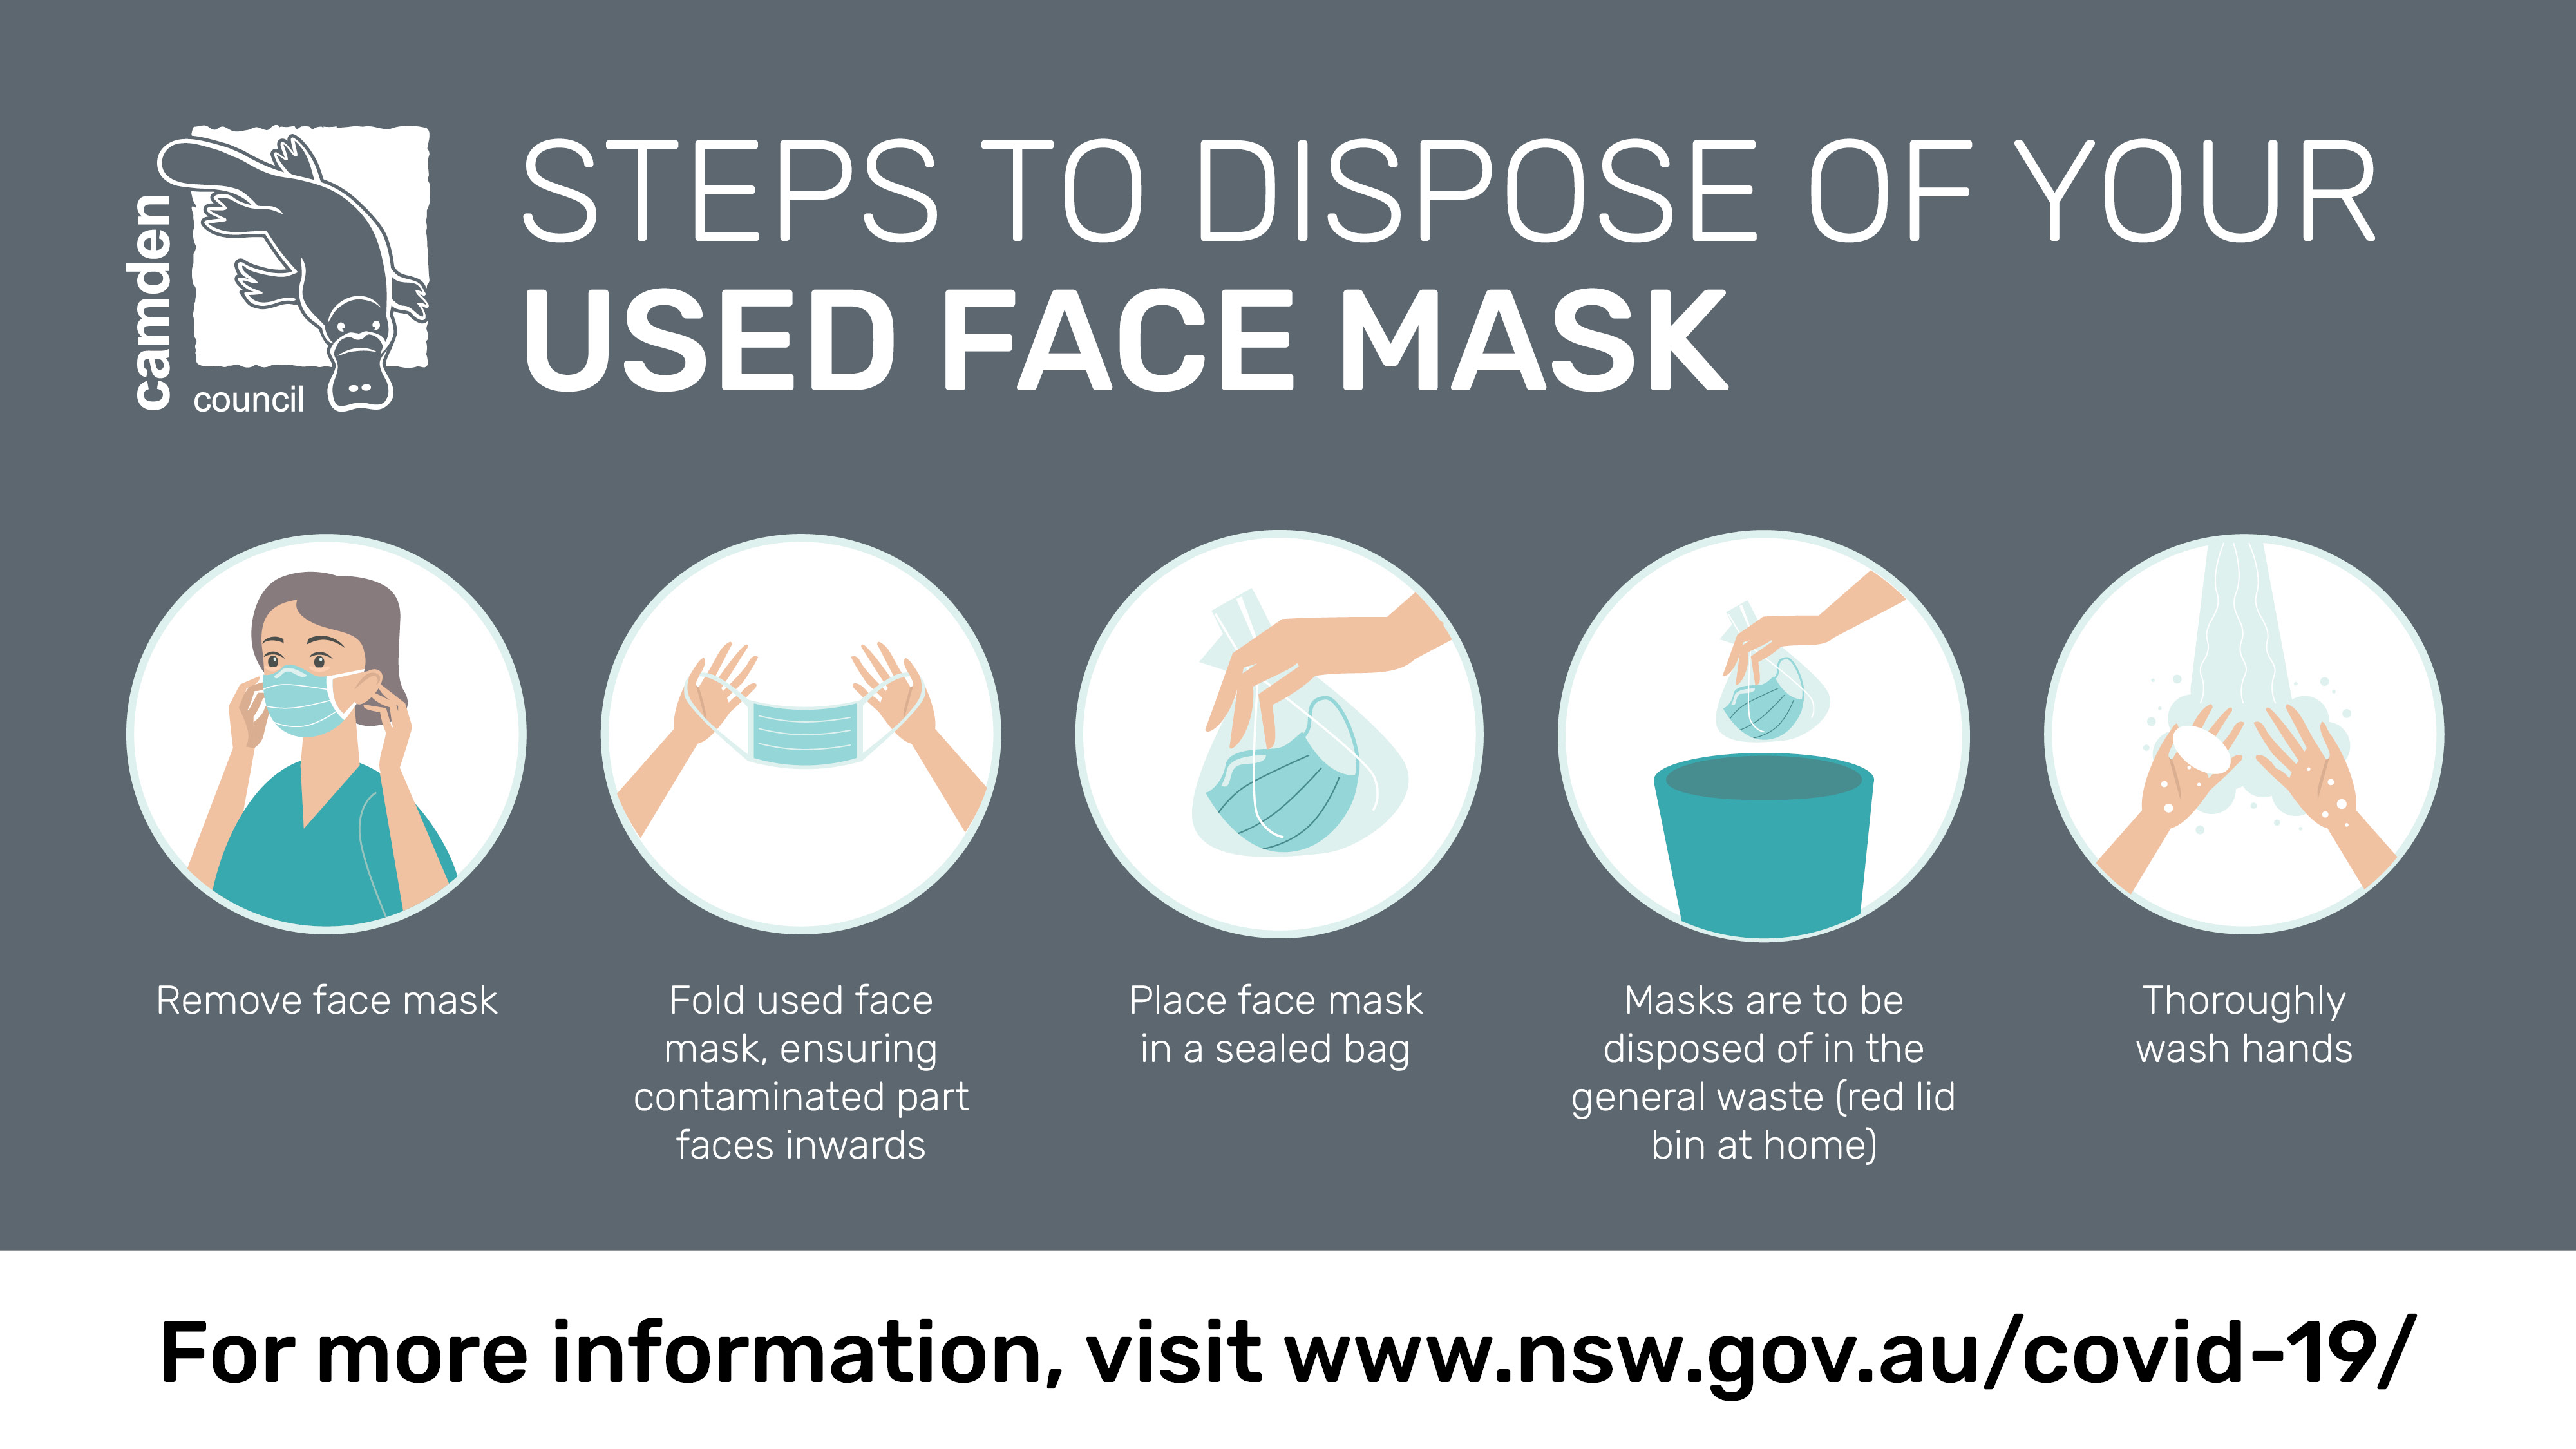 How To Wear, Use, Take-Off And Dispose Of A Face Mask Correctly